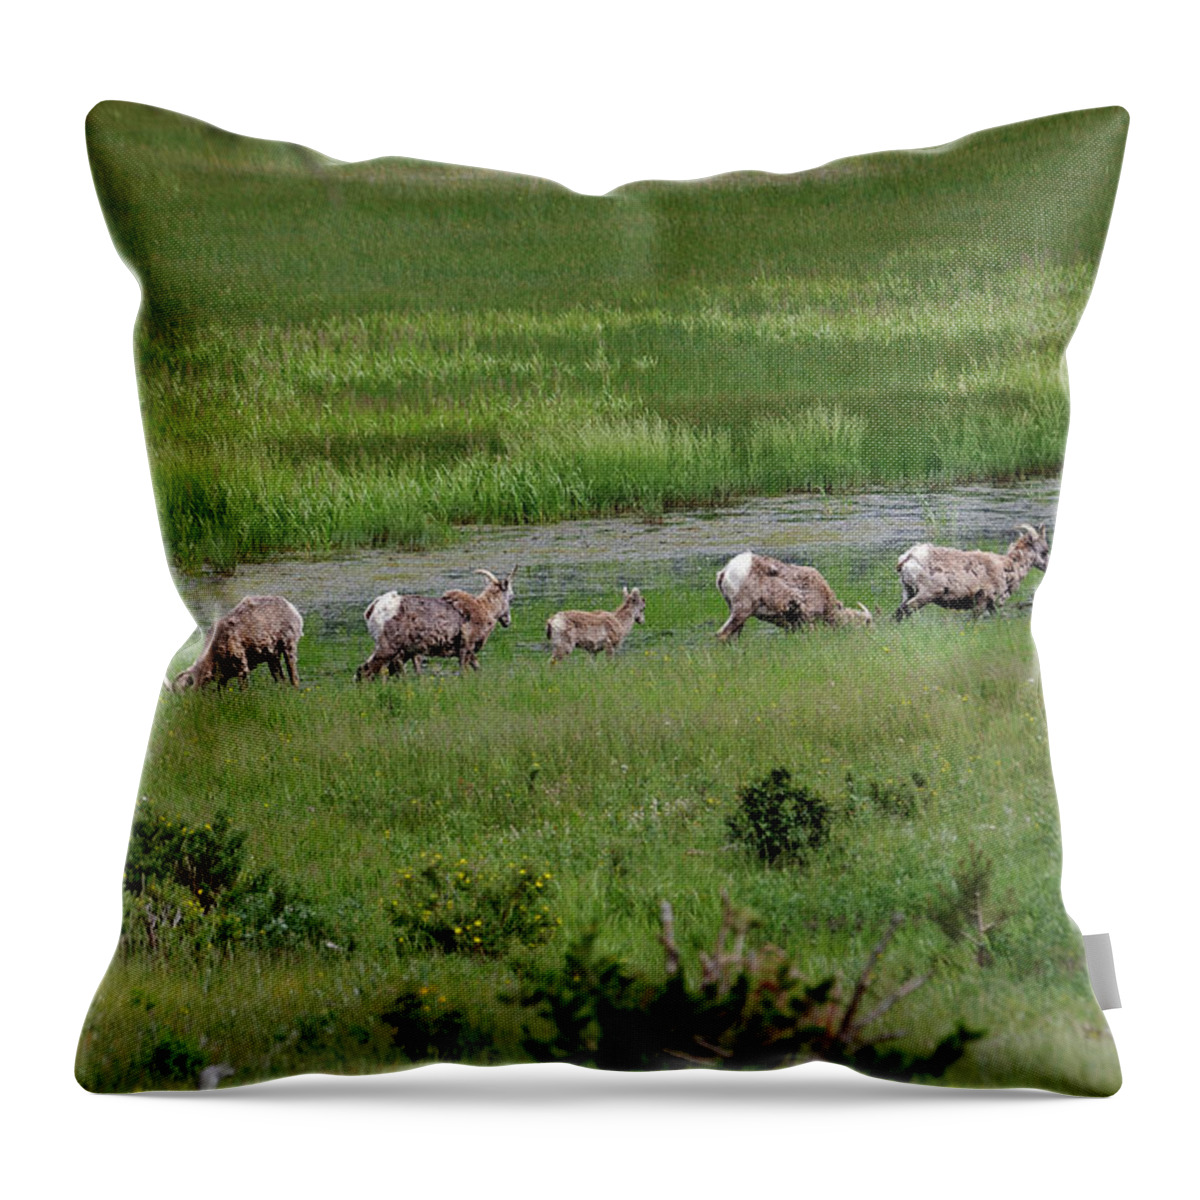 Co Throw Pillow featuring the photograph Rocky Mountain National Park by Doug Wittrock